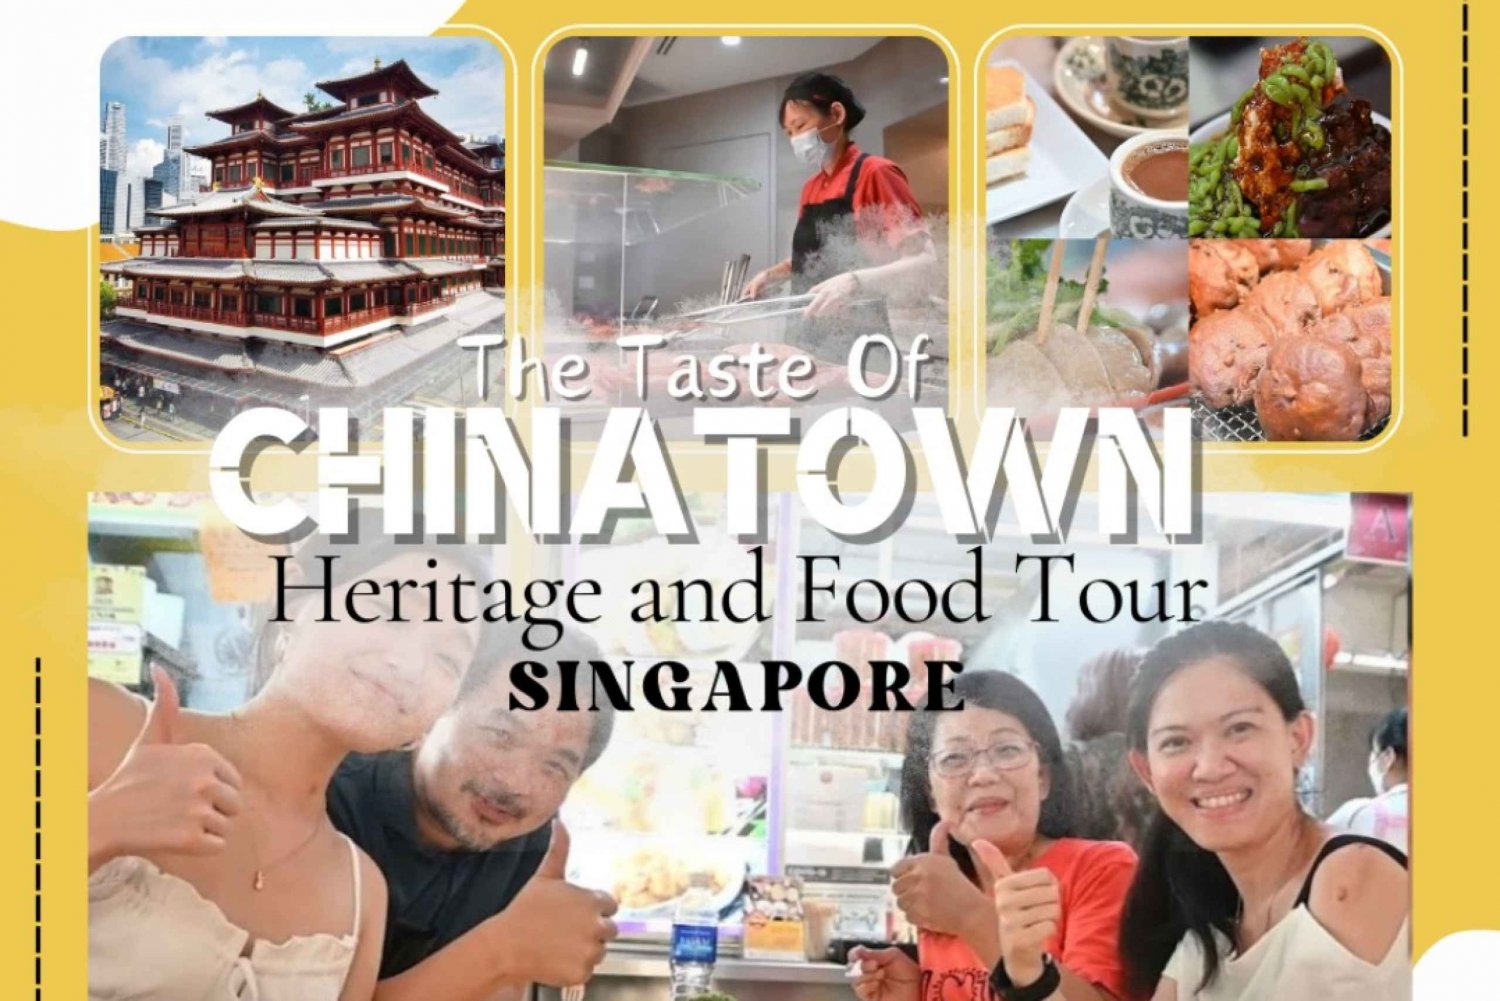 The Taste of Chinatown: Heritage & Hawker Food Tour